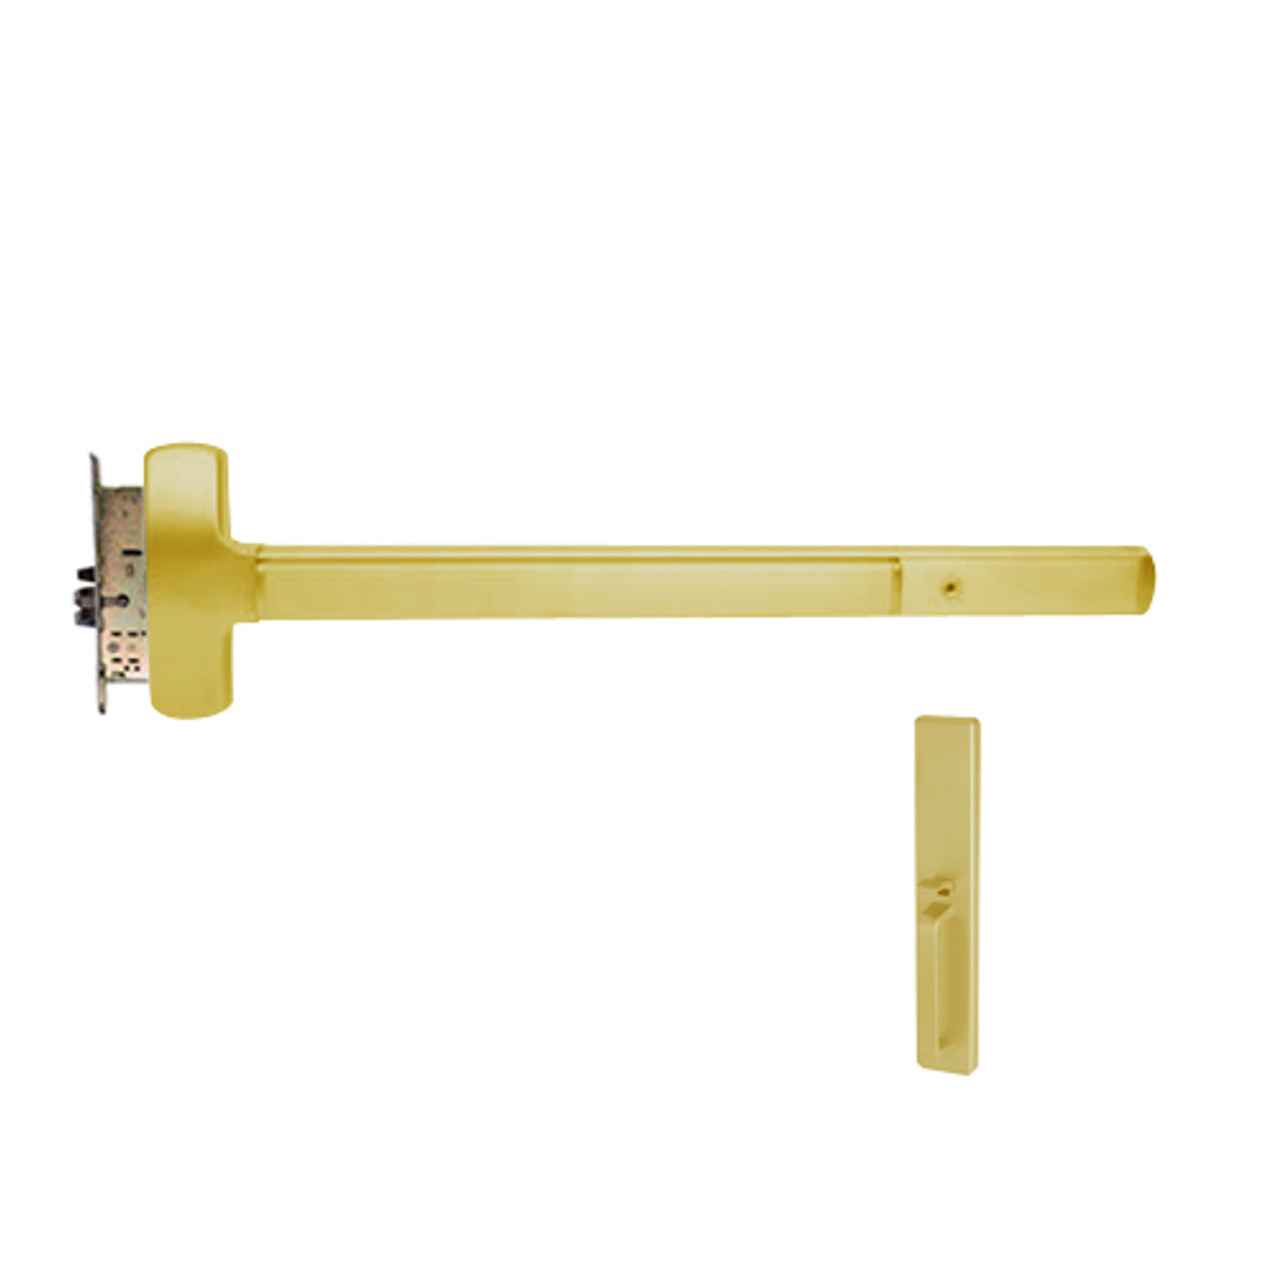 25-M-TP-BE-US4-3-LHR Falcon Exit Device in Satin Brass